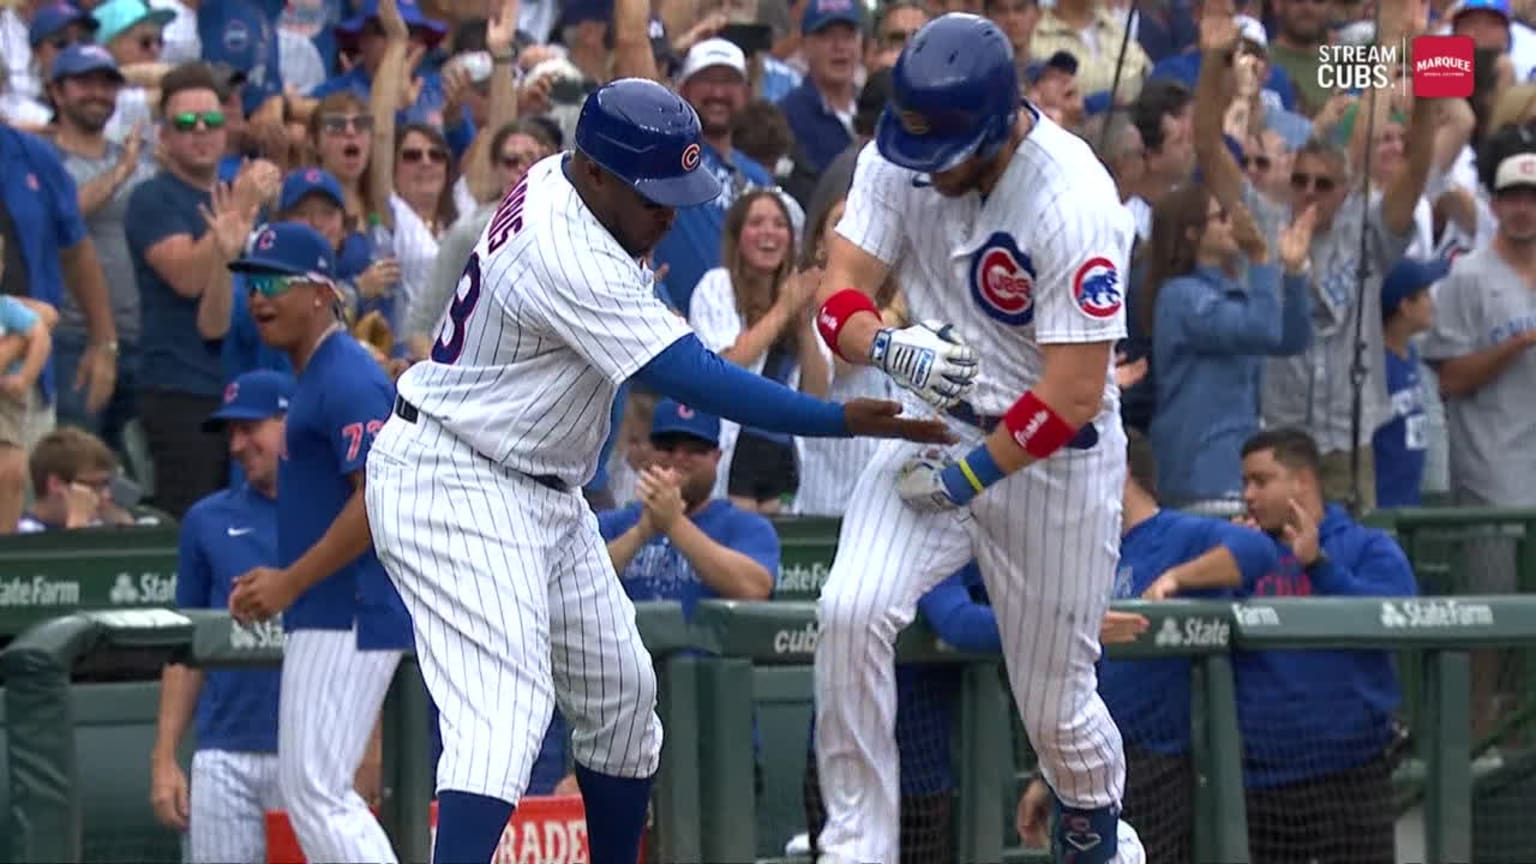 Patrick Wisdom Blasts 2 Homers, Cubs Roll 10-1 Over A's